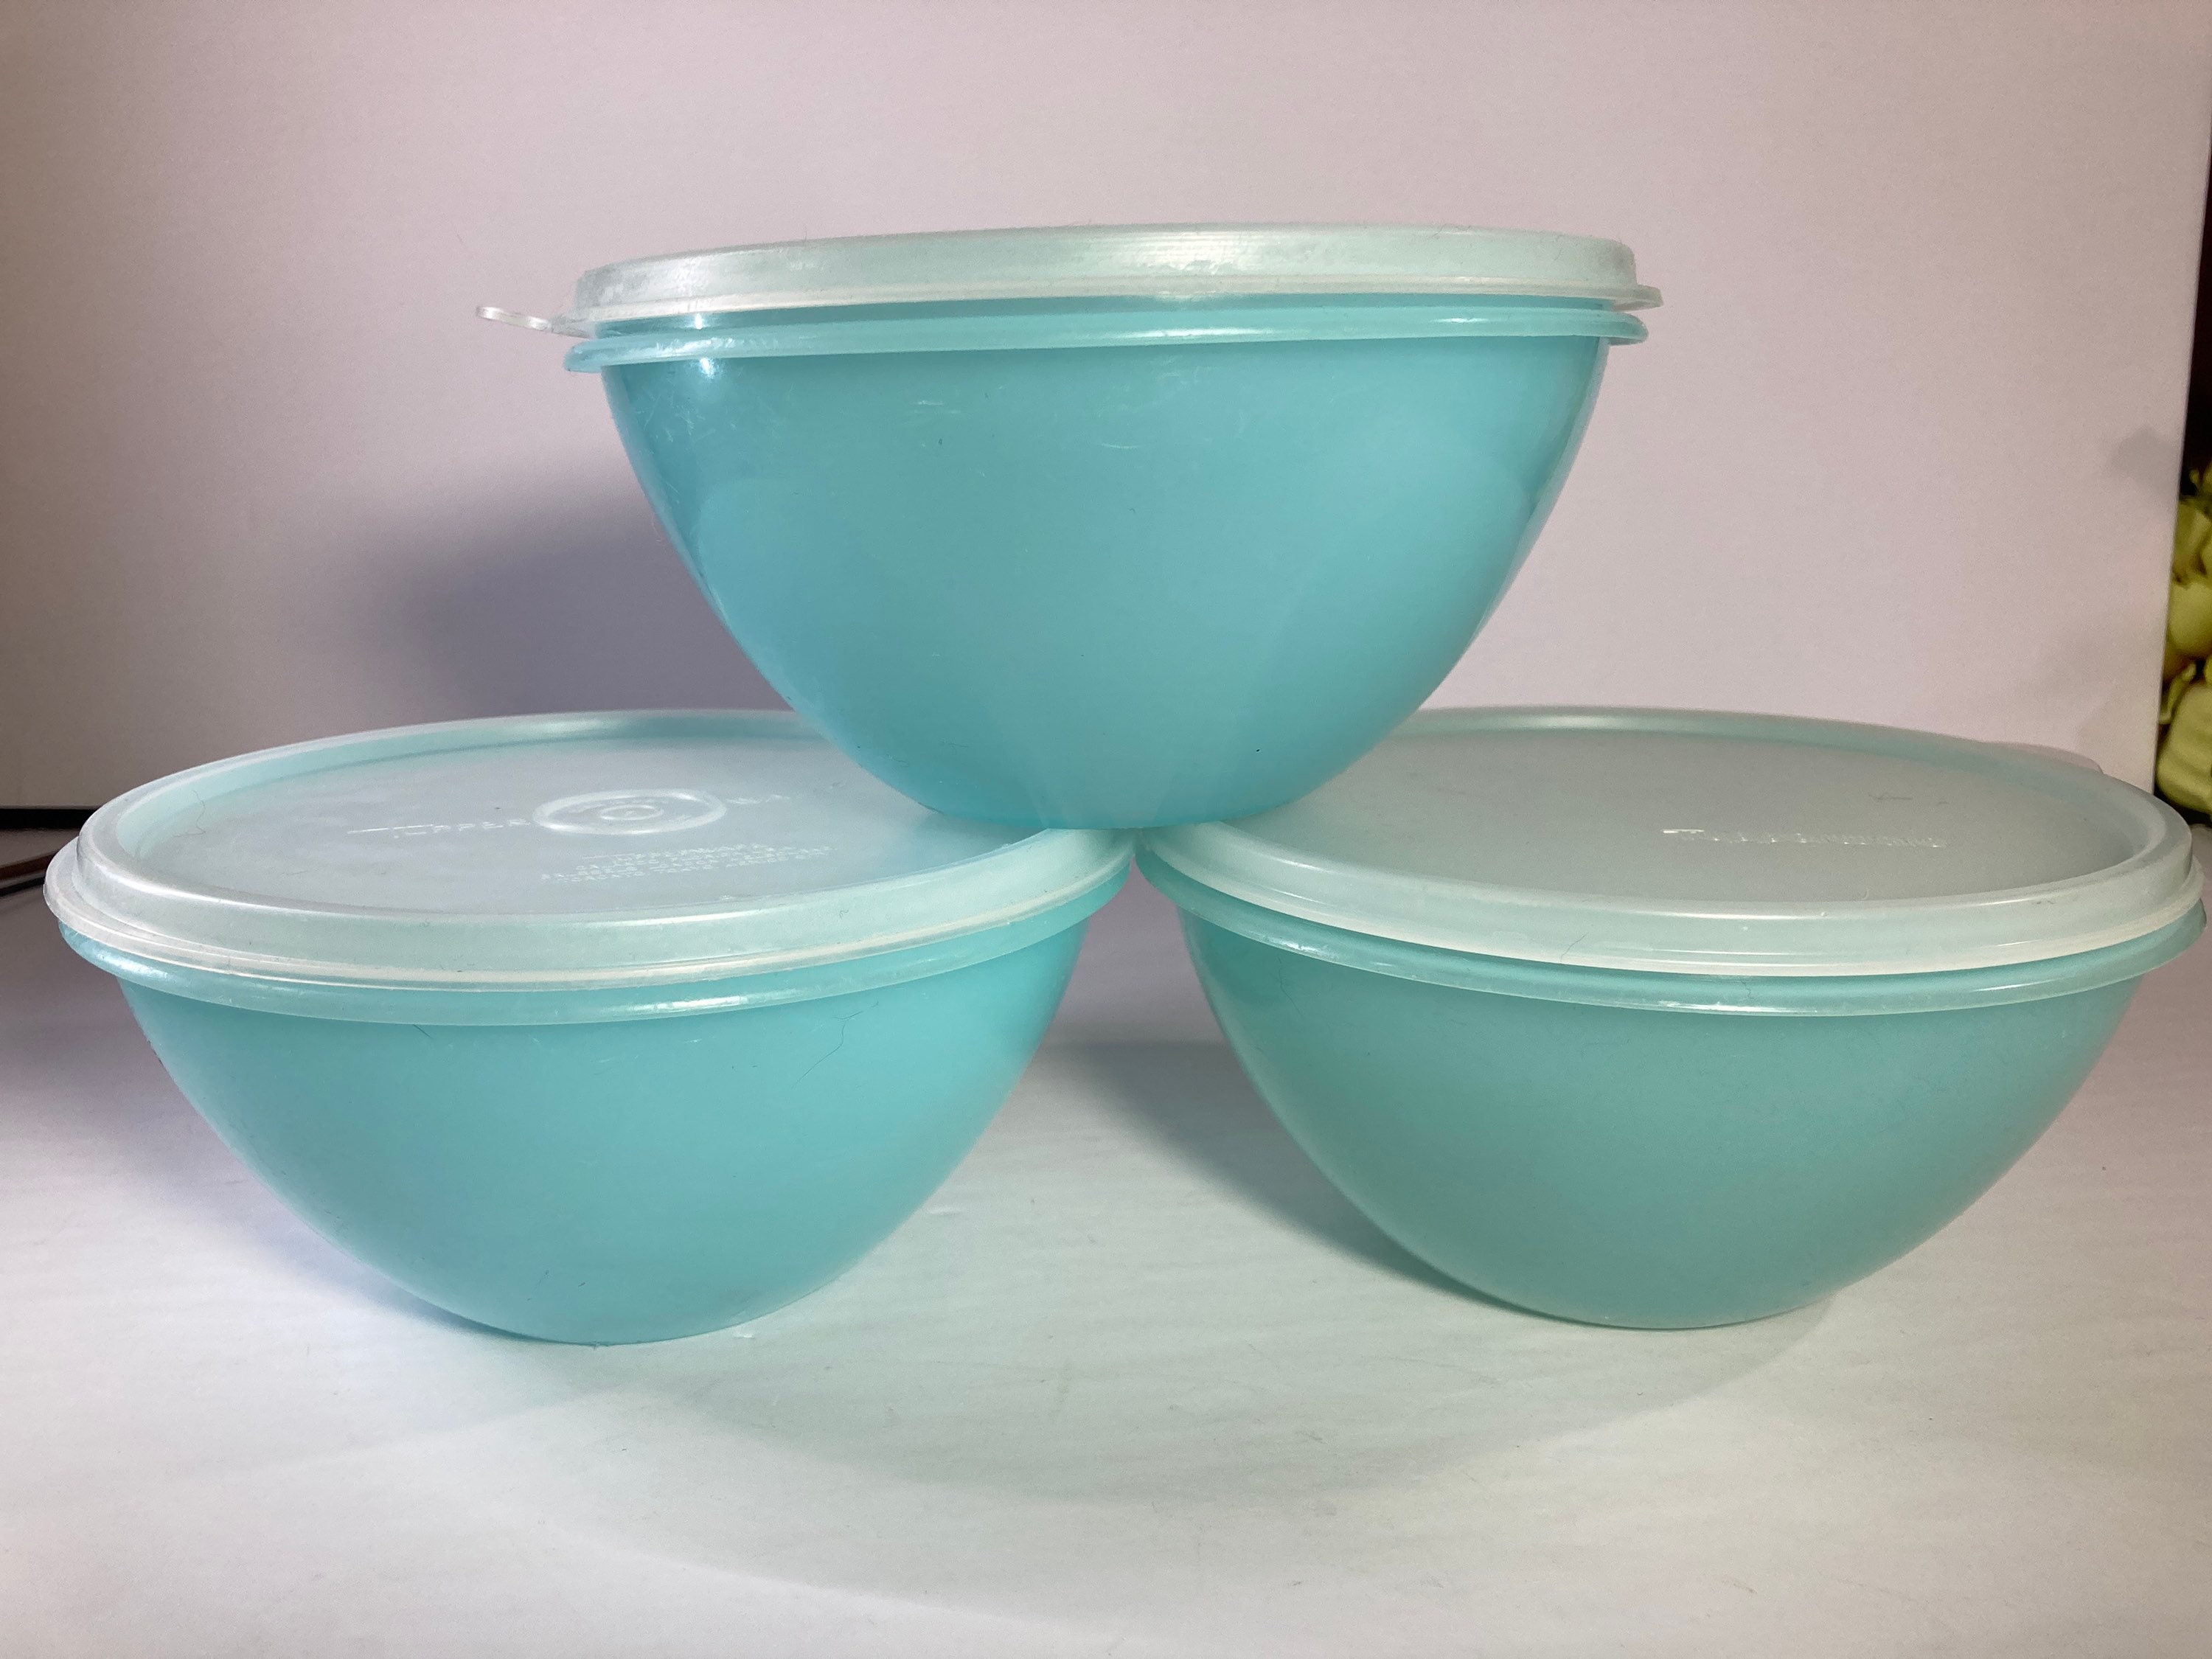 Tupperware picks a new CEO; celebrating the acrylic that made car